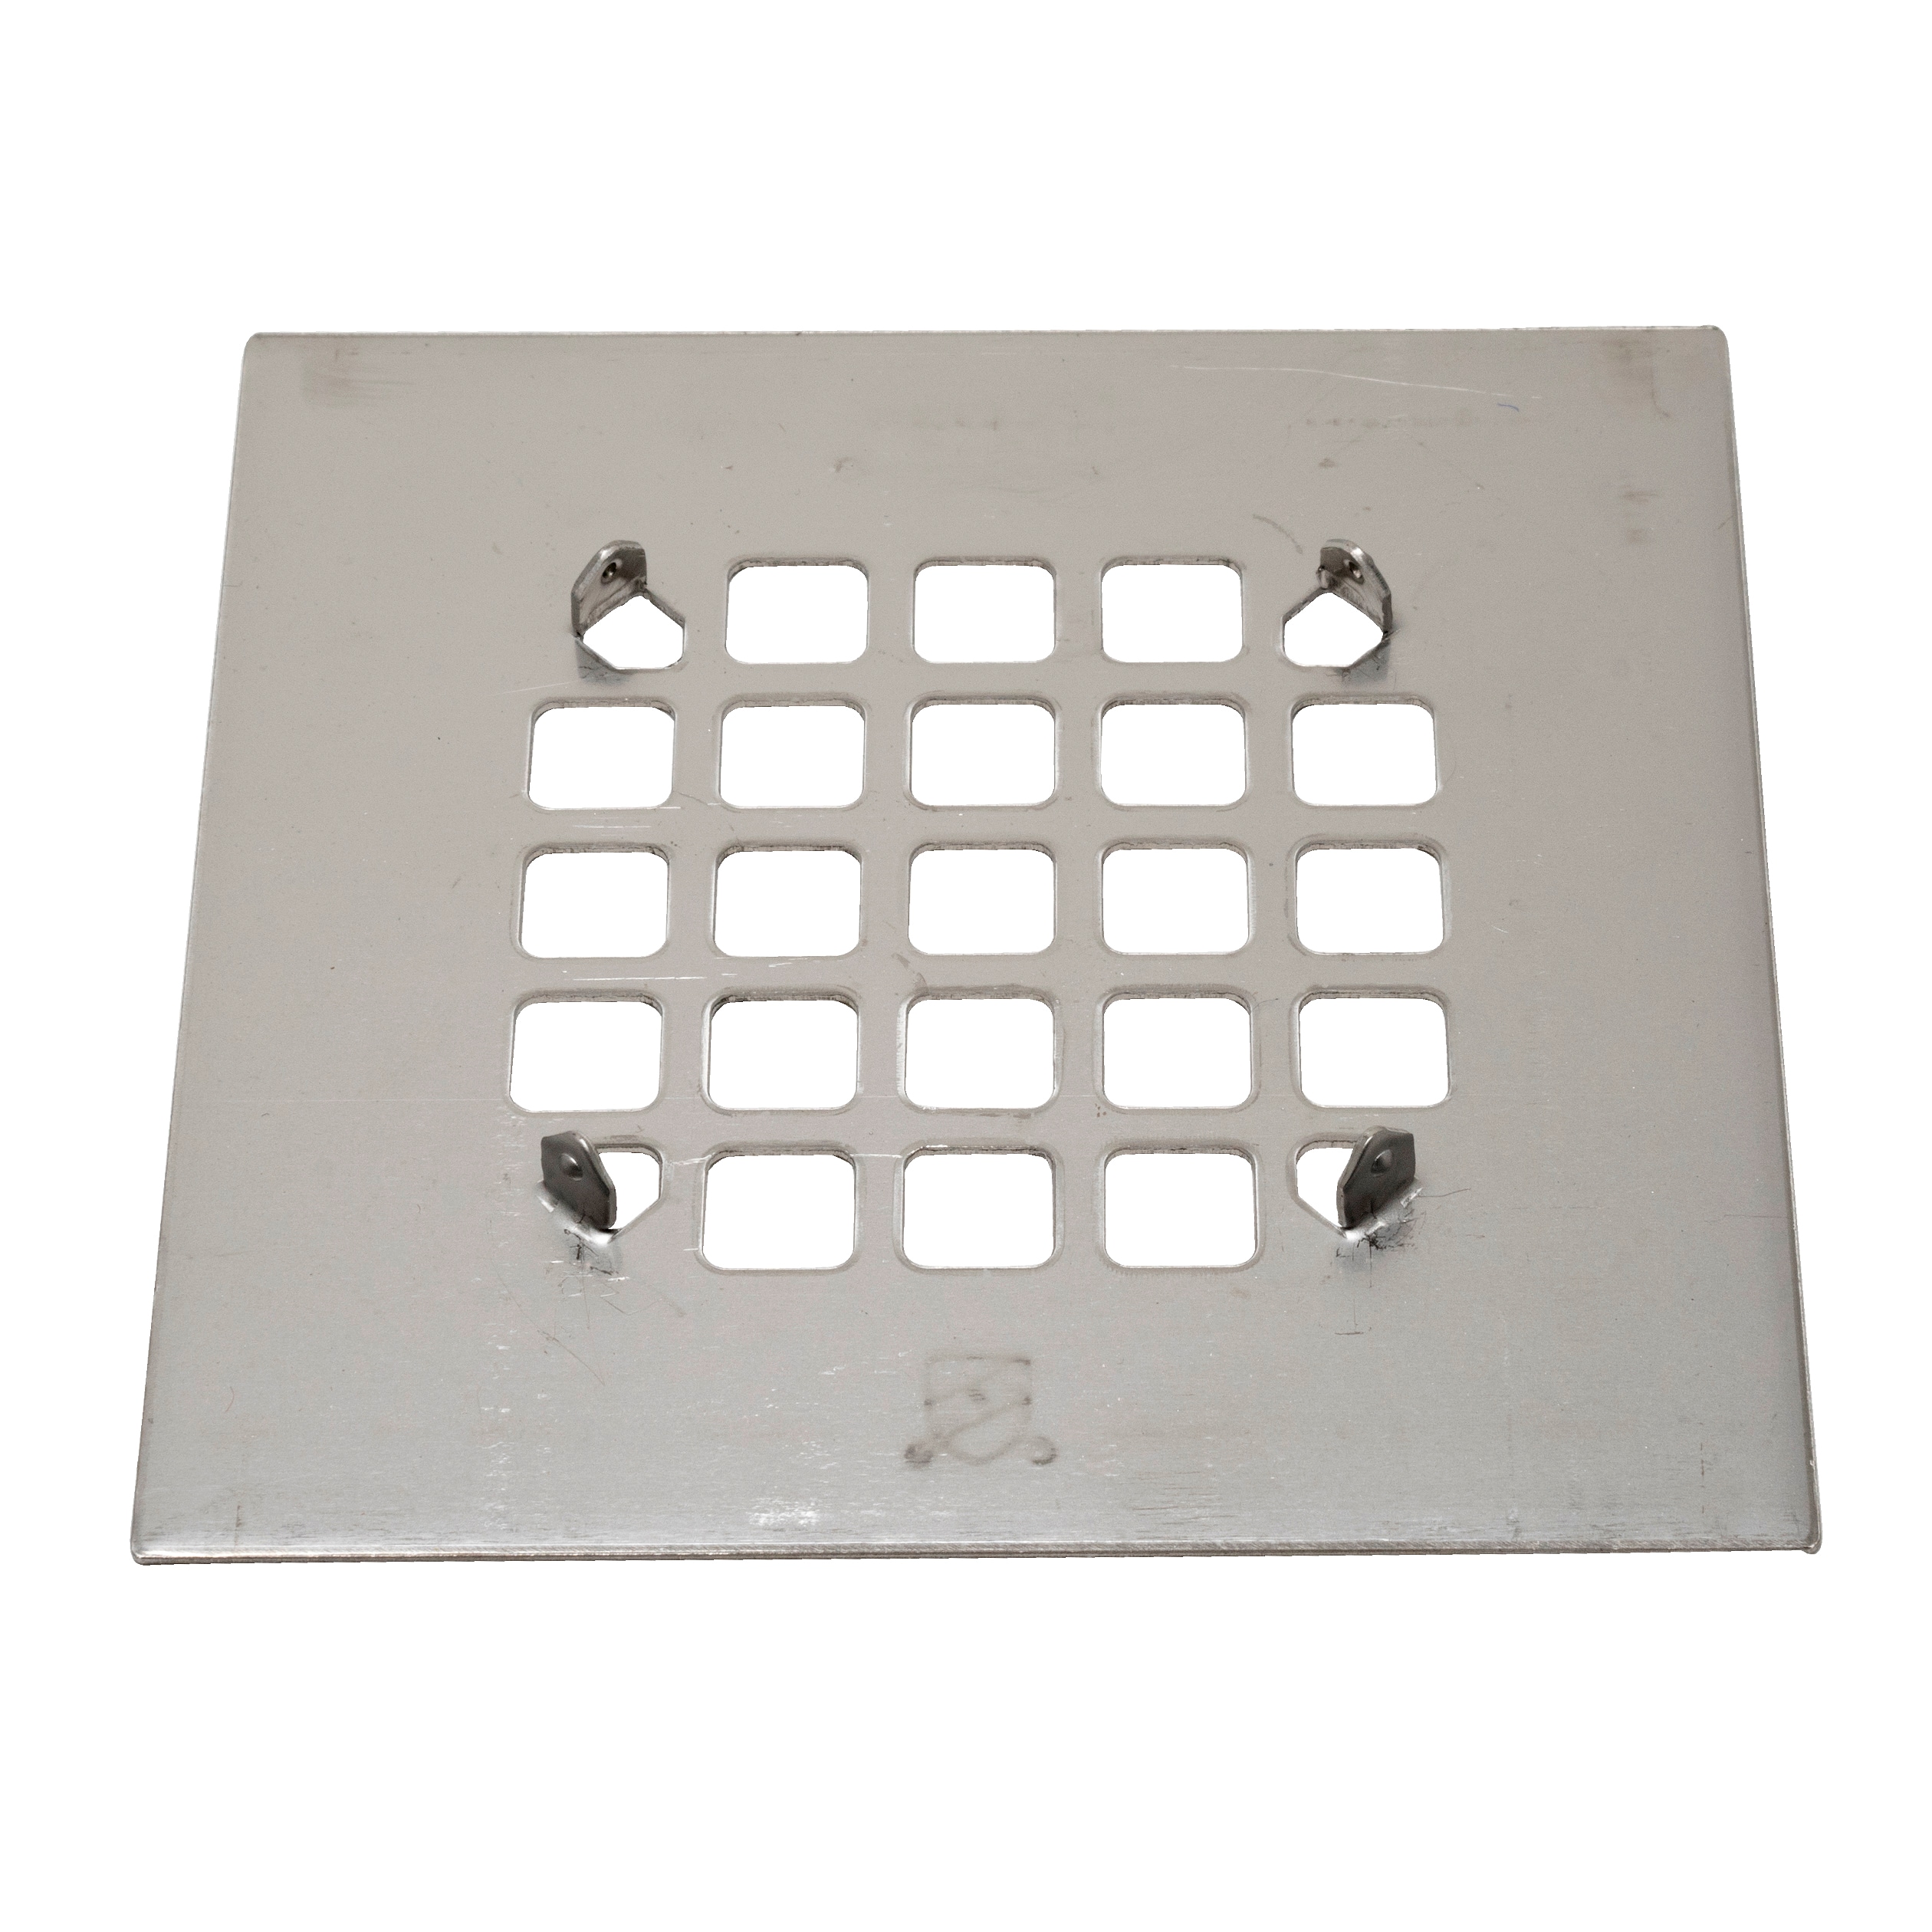 4 Inch Shower Drain Cover | Replacement For Square Oatey 42238 & 42237 |  Architecture No. 5™